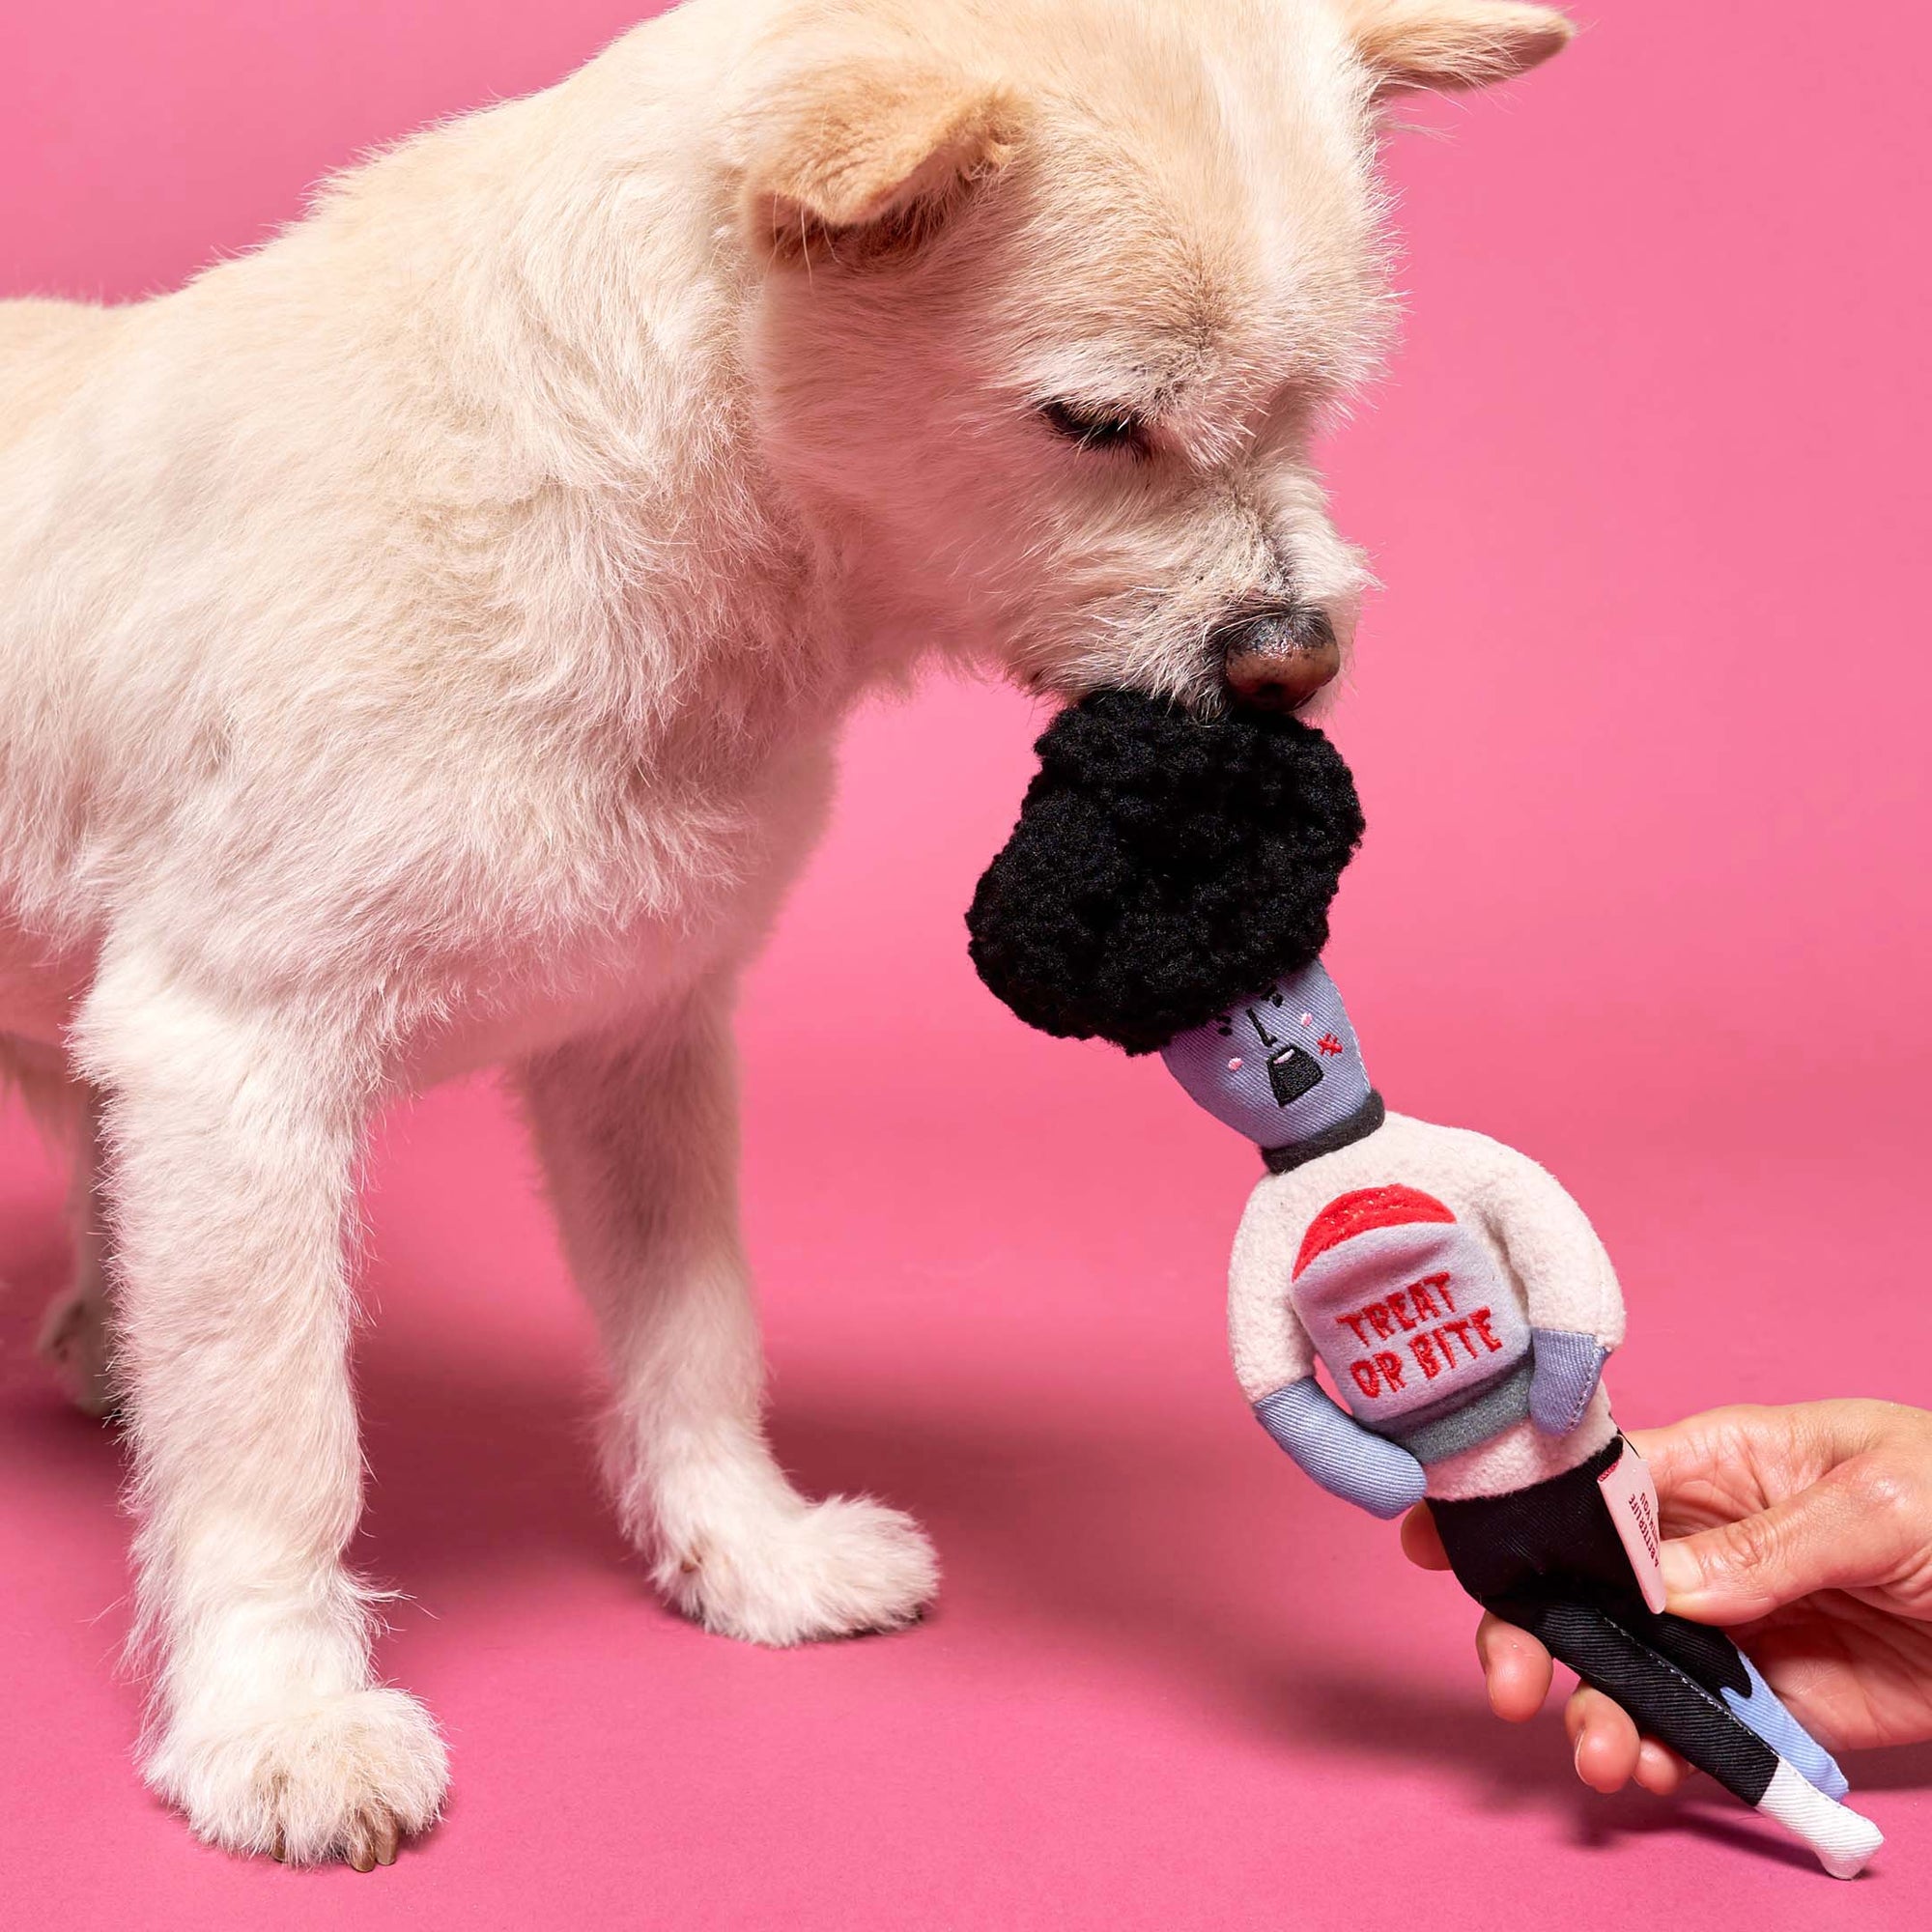 The image depicts a light-furred dog interacting with a plush zombie-themed toy presented by a human hand. The toy, featuring a playful "TREAT OR BITE" slogan, is being sniffed by the dog, indicating curiosity or the beginning of play. The vivid pink background contrasts sharply with the dog's light coat and the toy's gray and black colors, drawing the viewer's focus to the interaction between the dog and the toy.